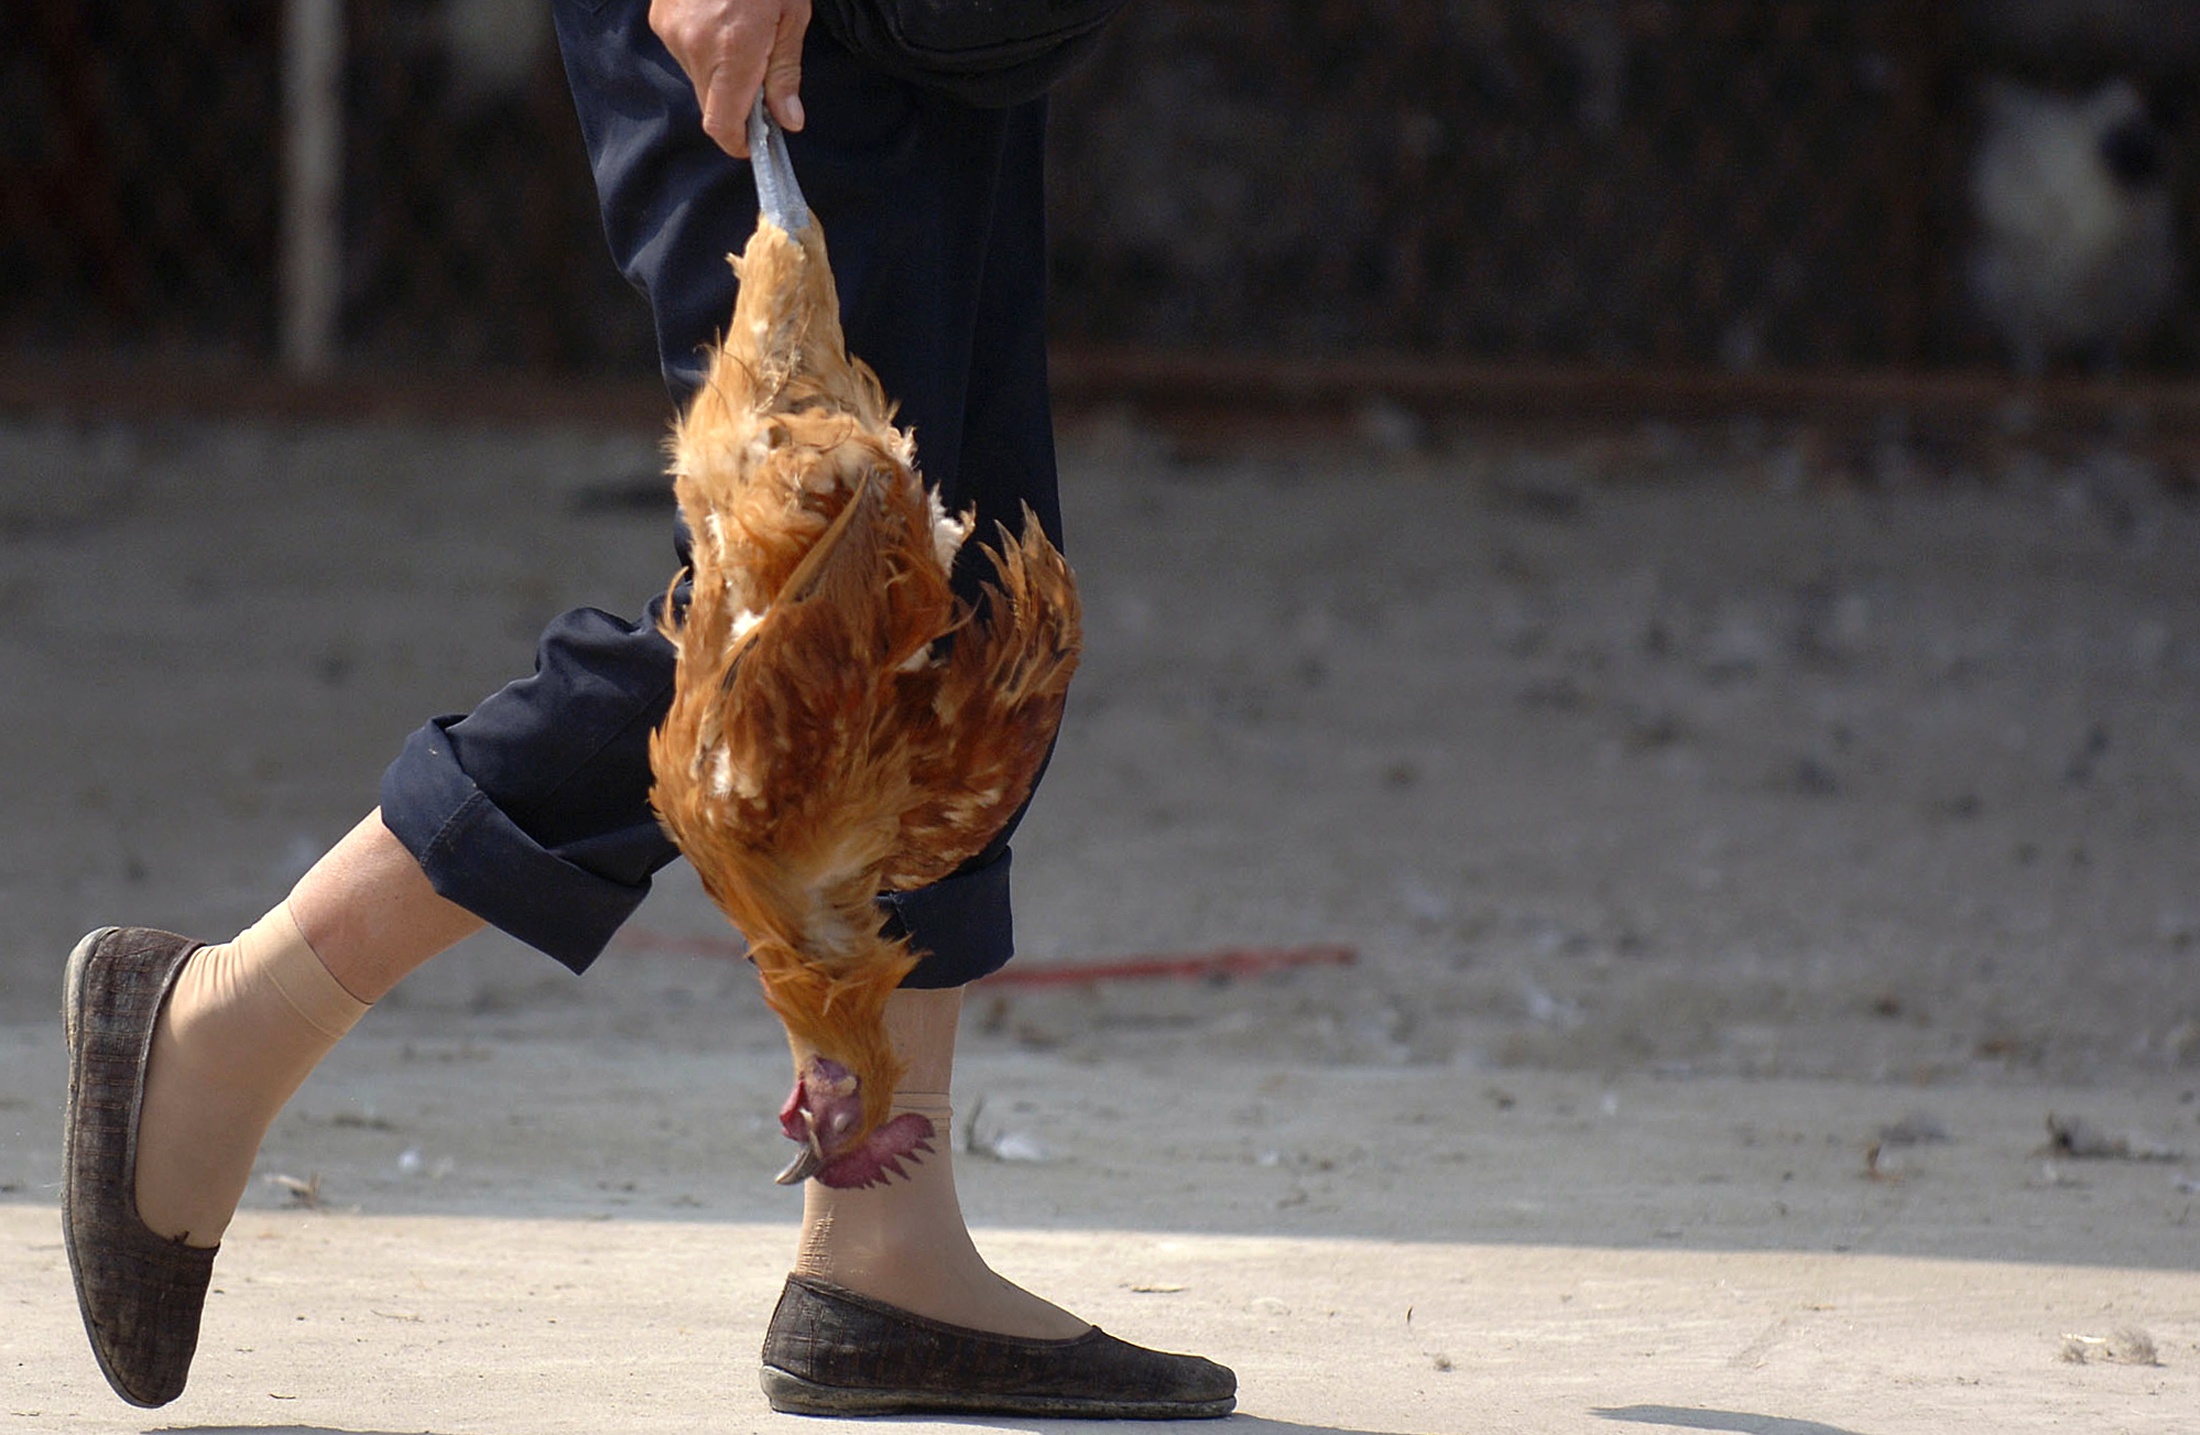 A customer carries a dead chicken outside a poultry market in Hefei, east China's Anhui province. Photo: Reuters